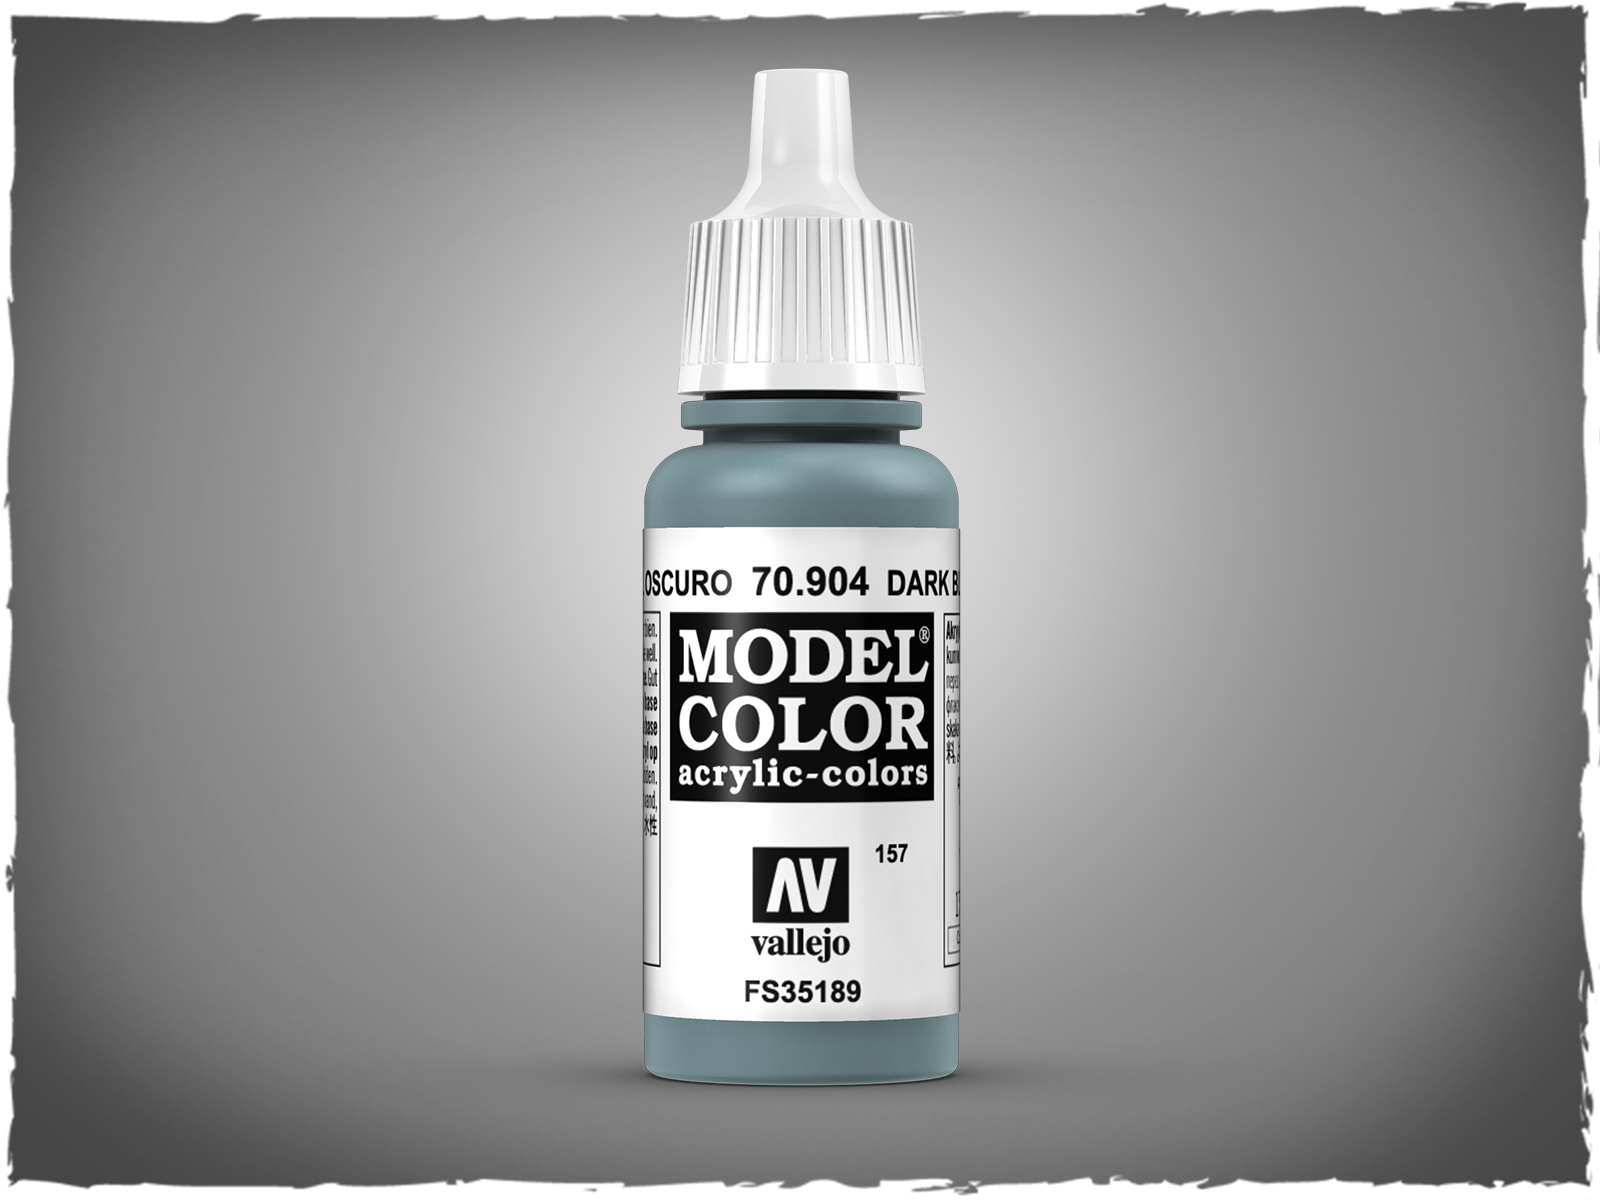 Vallejo Model Color acrylic paint - 70.842 Gloss White